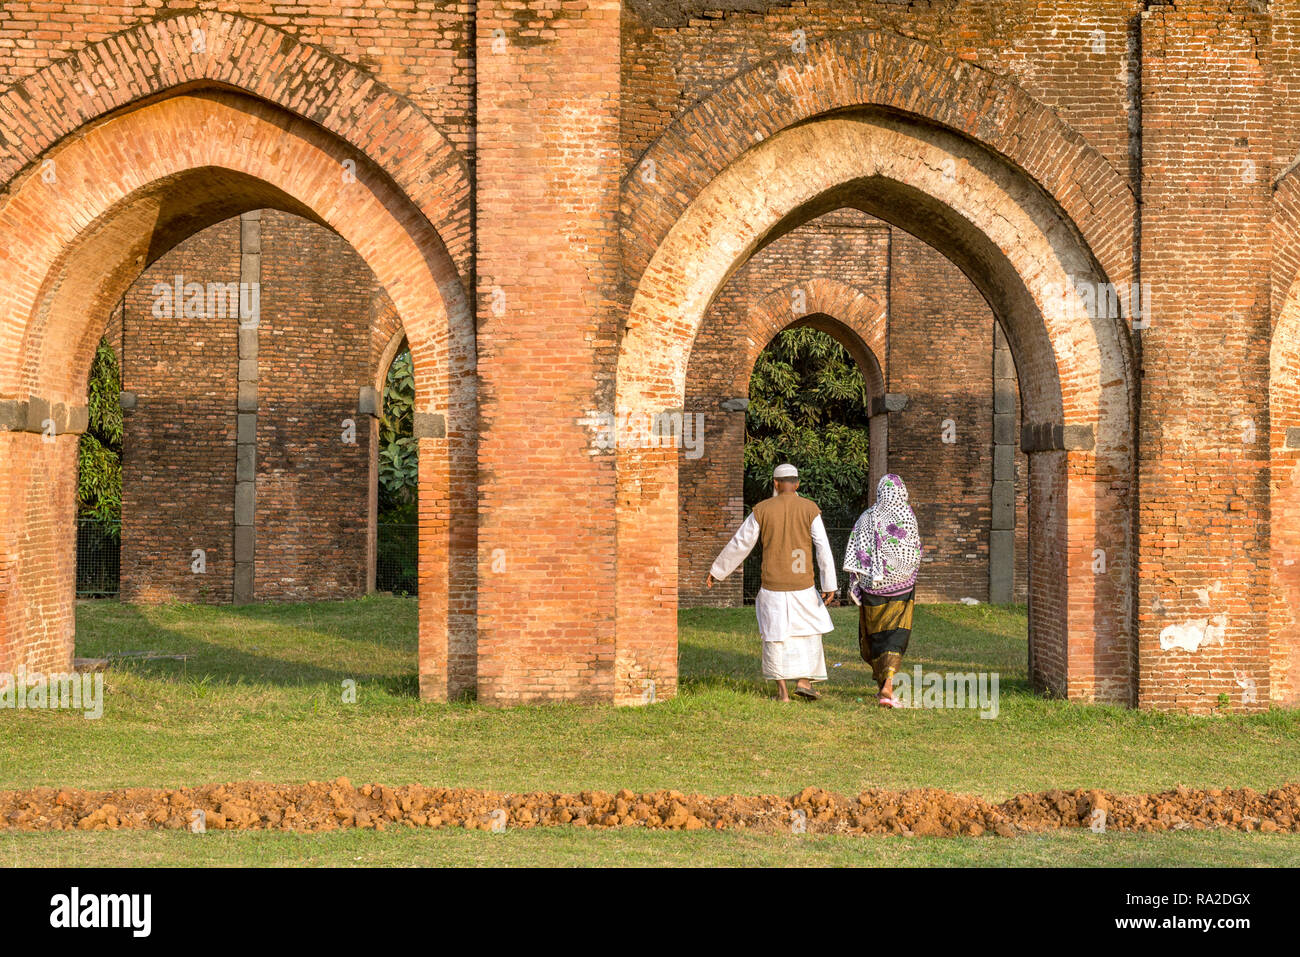 PANDUA, WEST BENGAL, INDIA, Elderly muslim couple strolling through the remains of the Adina-mosque in warm evening light. Stock Photo